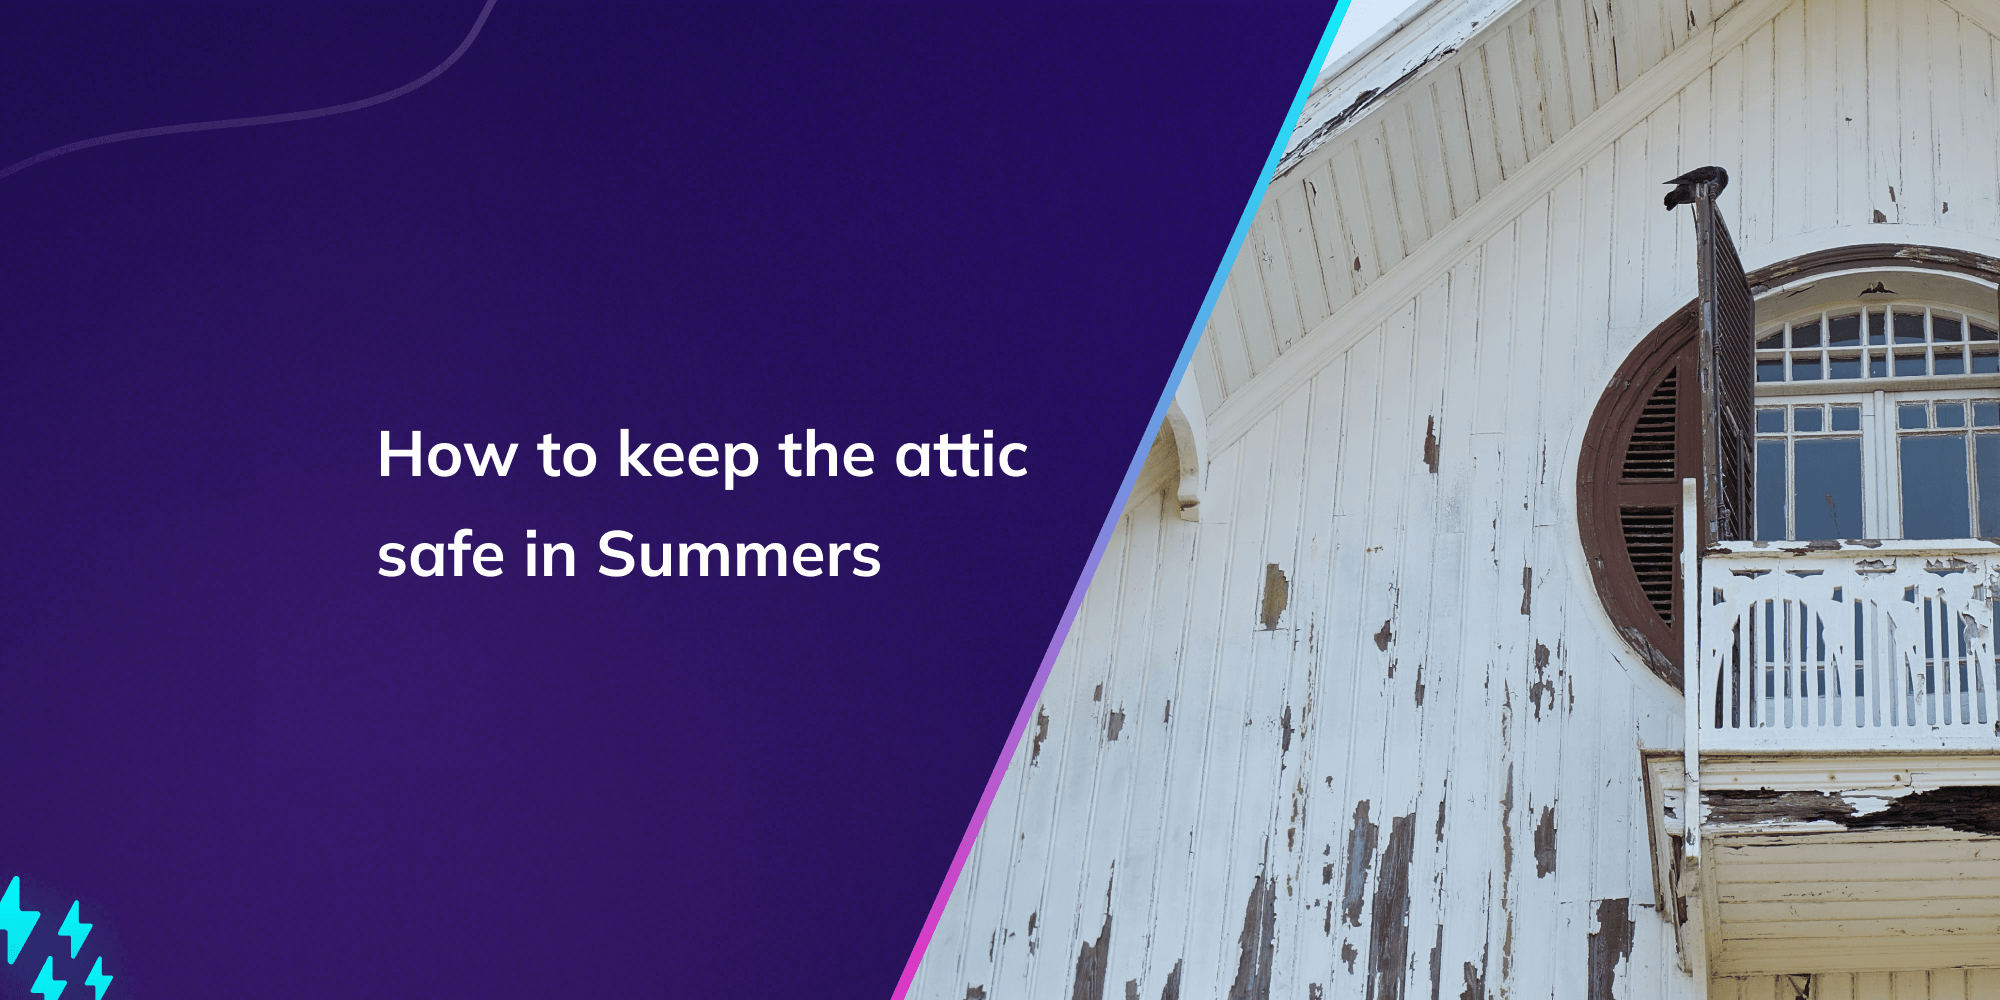 How to keep the attic safe in Summers